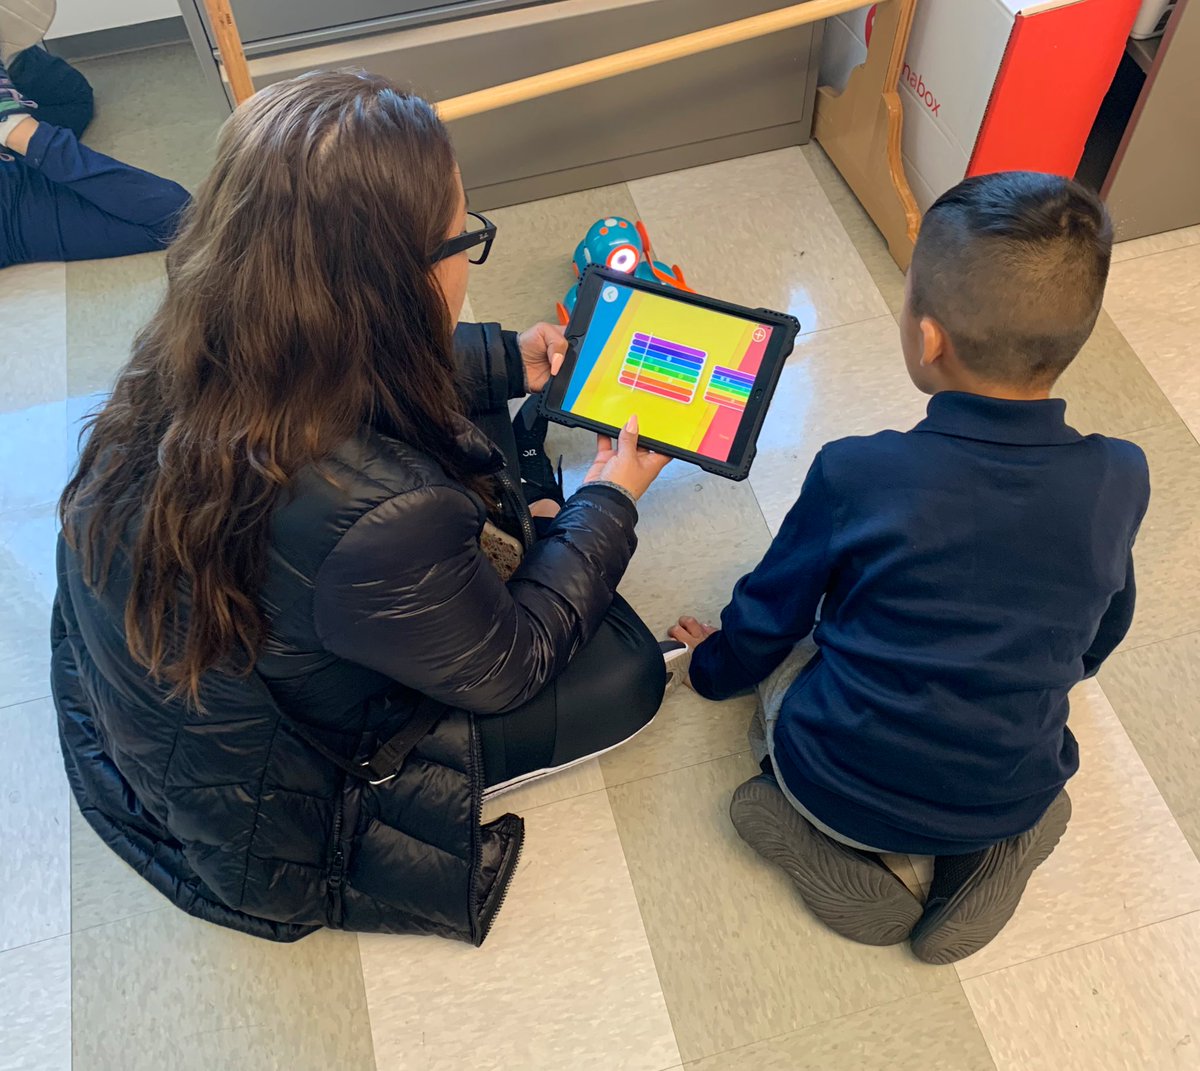 Had the wonderful opportunity to see a variety of computer science activities @ the #CSEdWeek 2022 Showcase @LraOwls. Students in every classroom were engaging in an #HourOfCode from social studies, to math, to literacy integration to paired programming with families! CS Leaders!